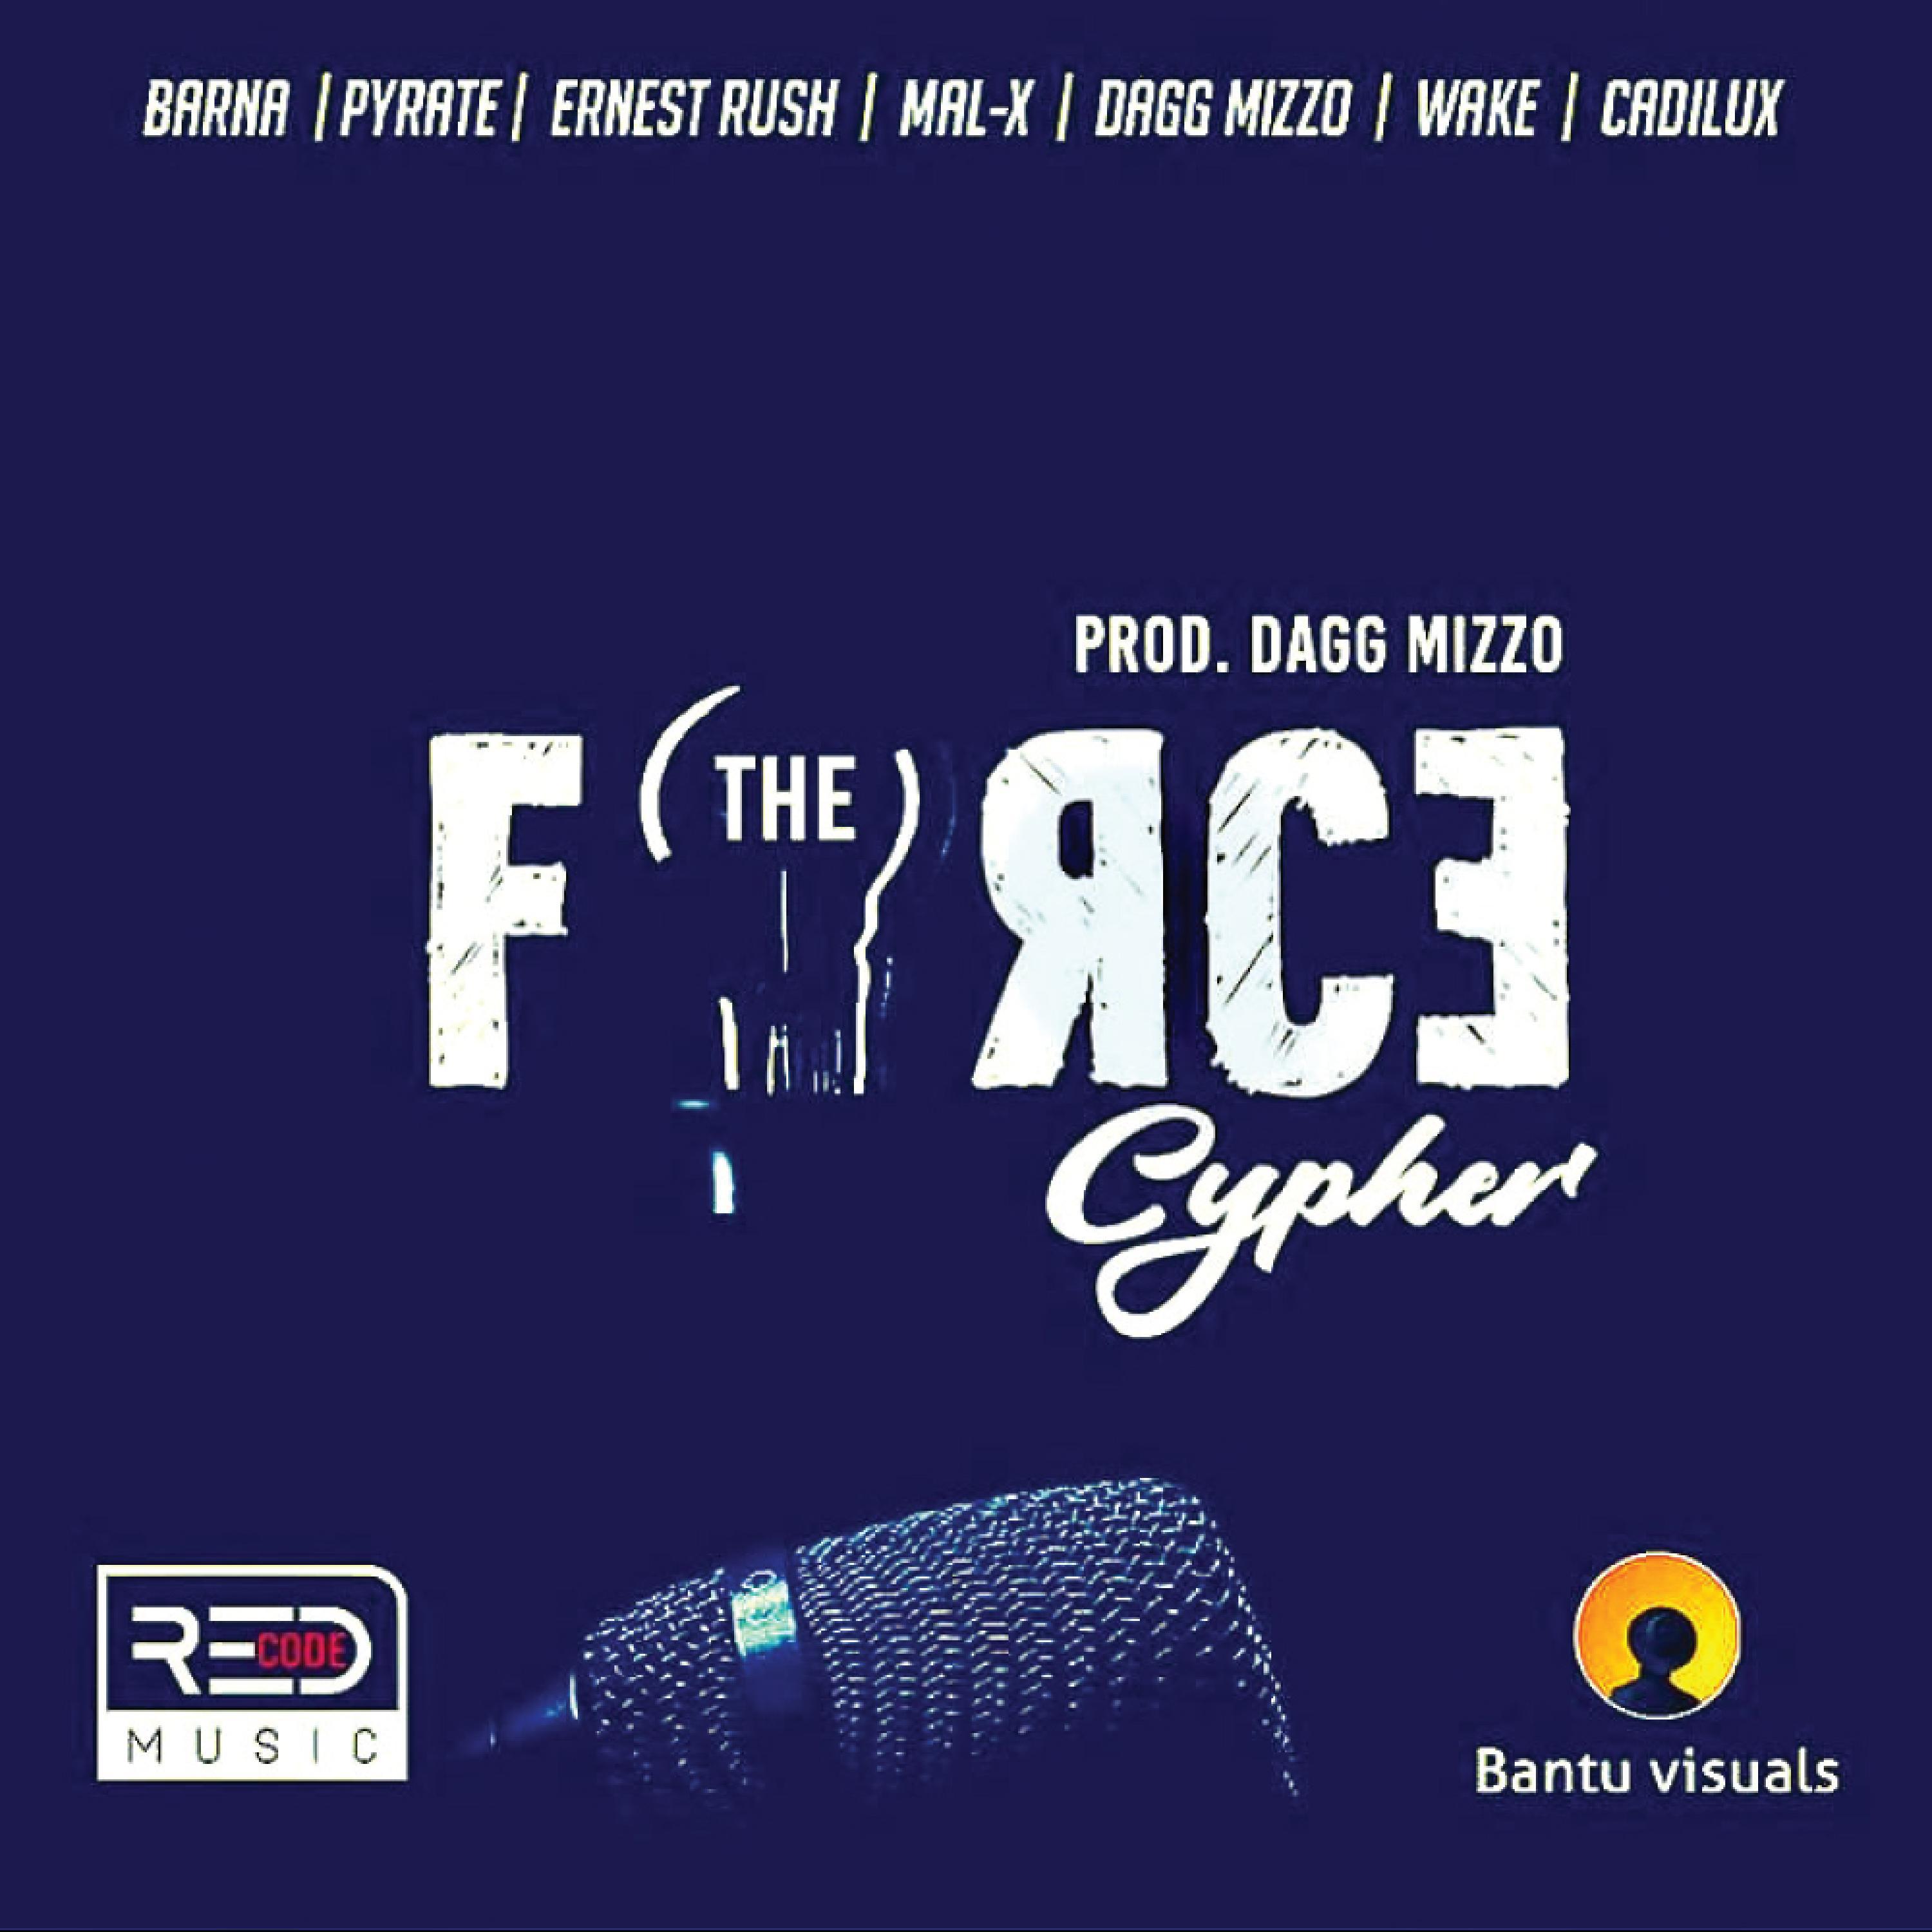 Barna - The Force cypher (feat. Mal-X, Pyrate, Ernest Rush, Cadilux, Wake & Dagg Mizzo)